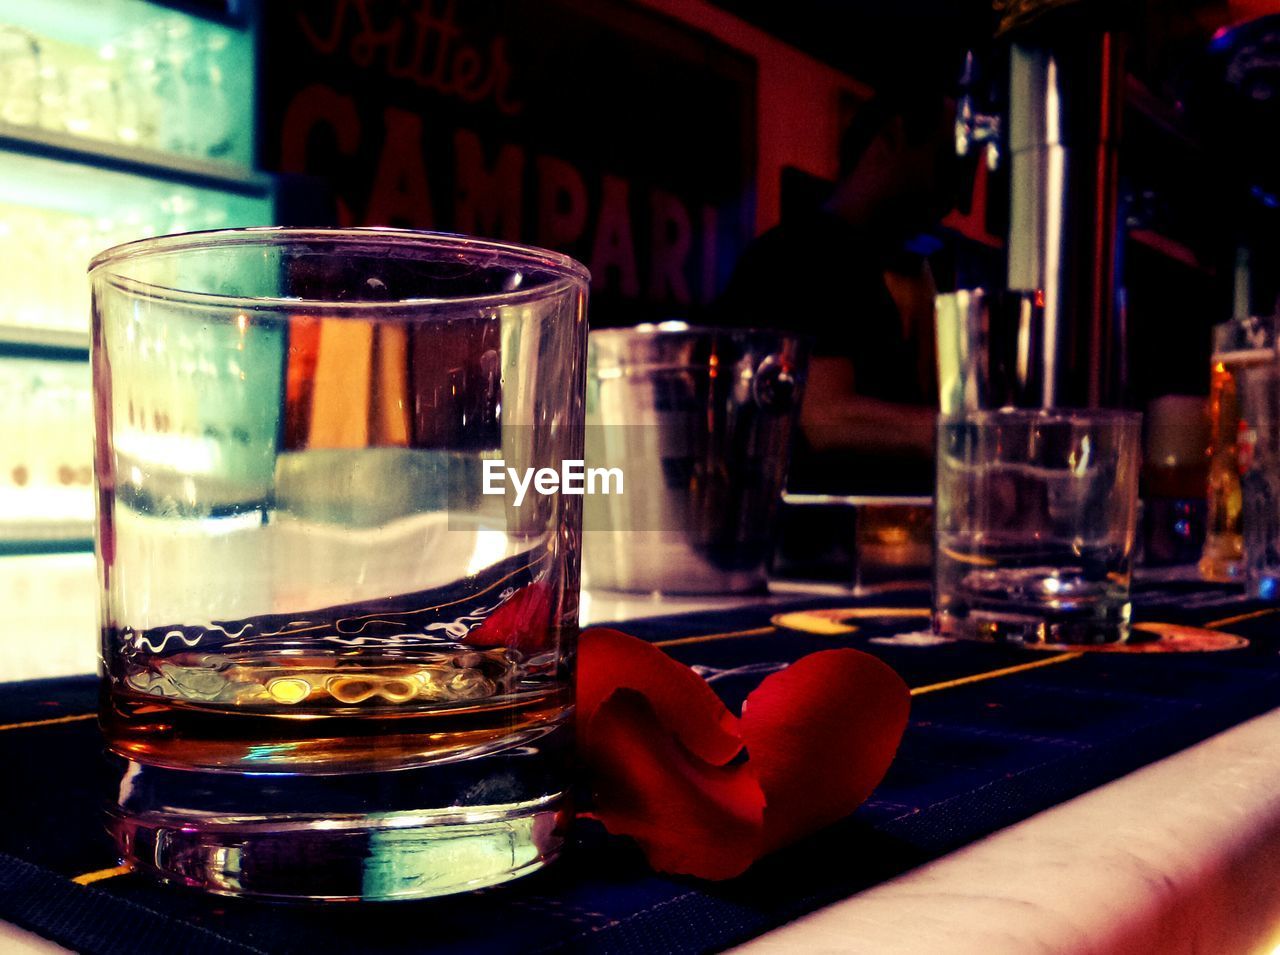 Close-up of scotch whisky in glass with red rose petal on bar counter at nightclub